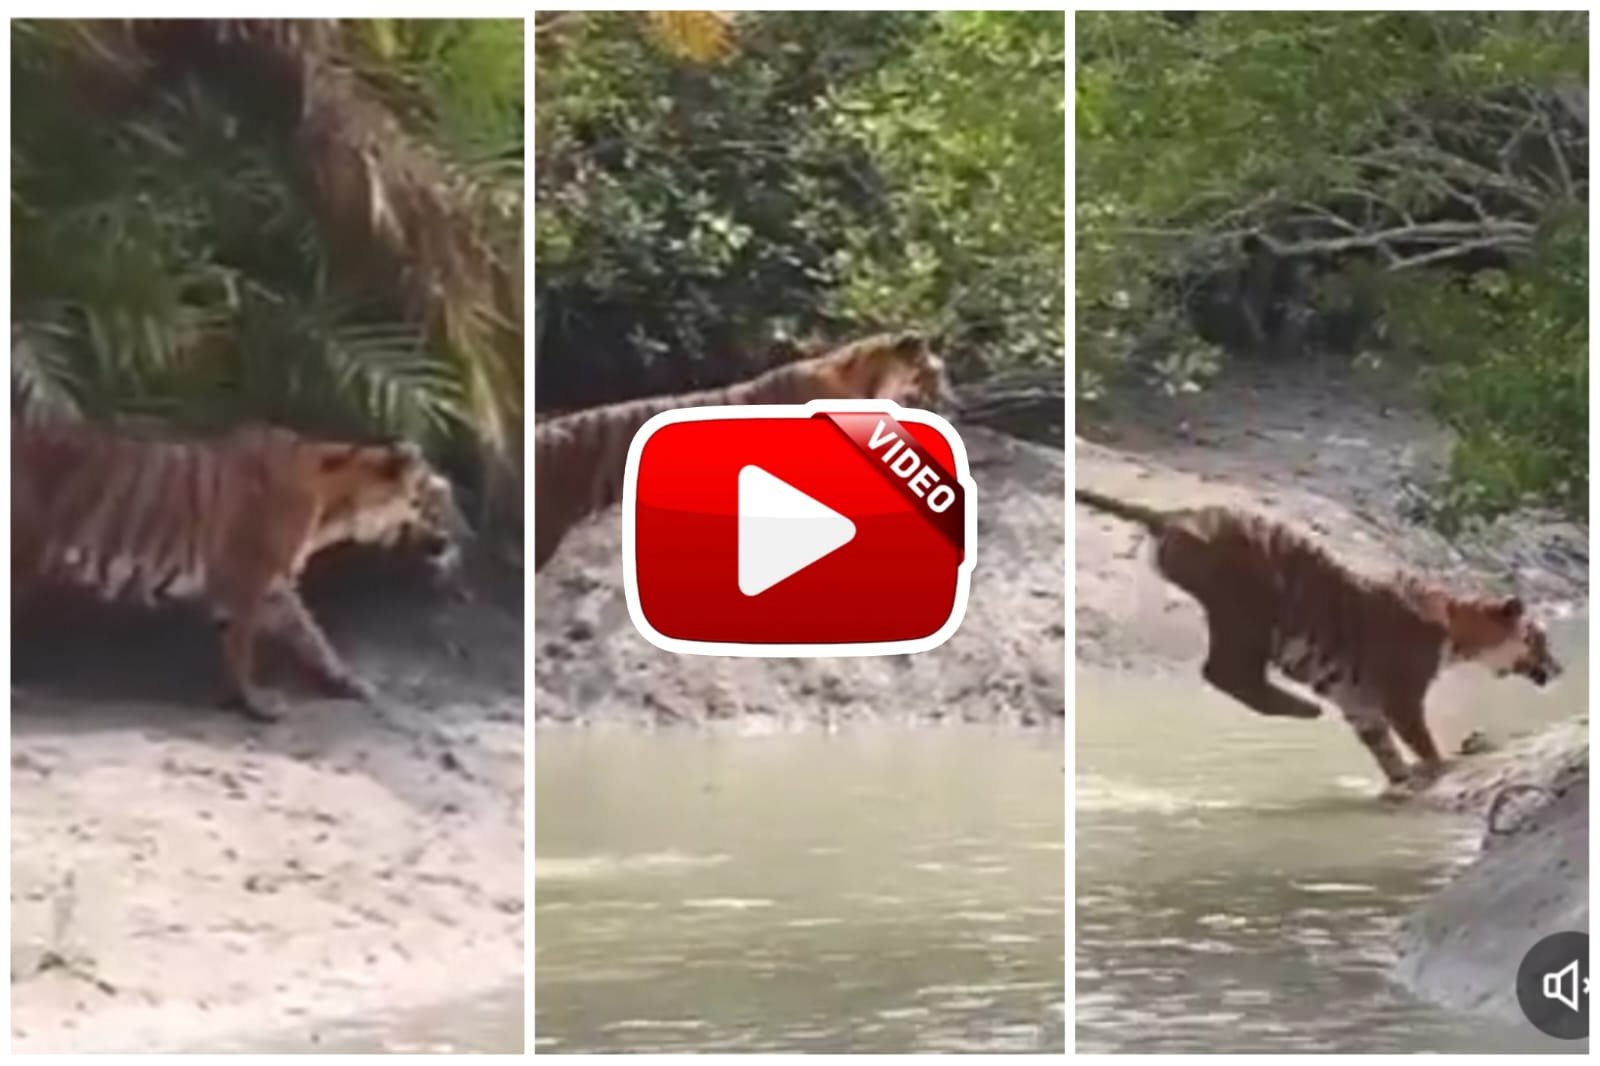 Garden Video | The dreaded tiger took a long leap to cross the river in the forest.